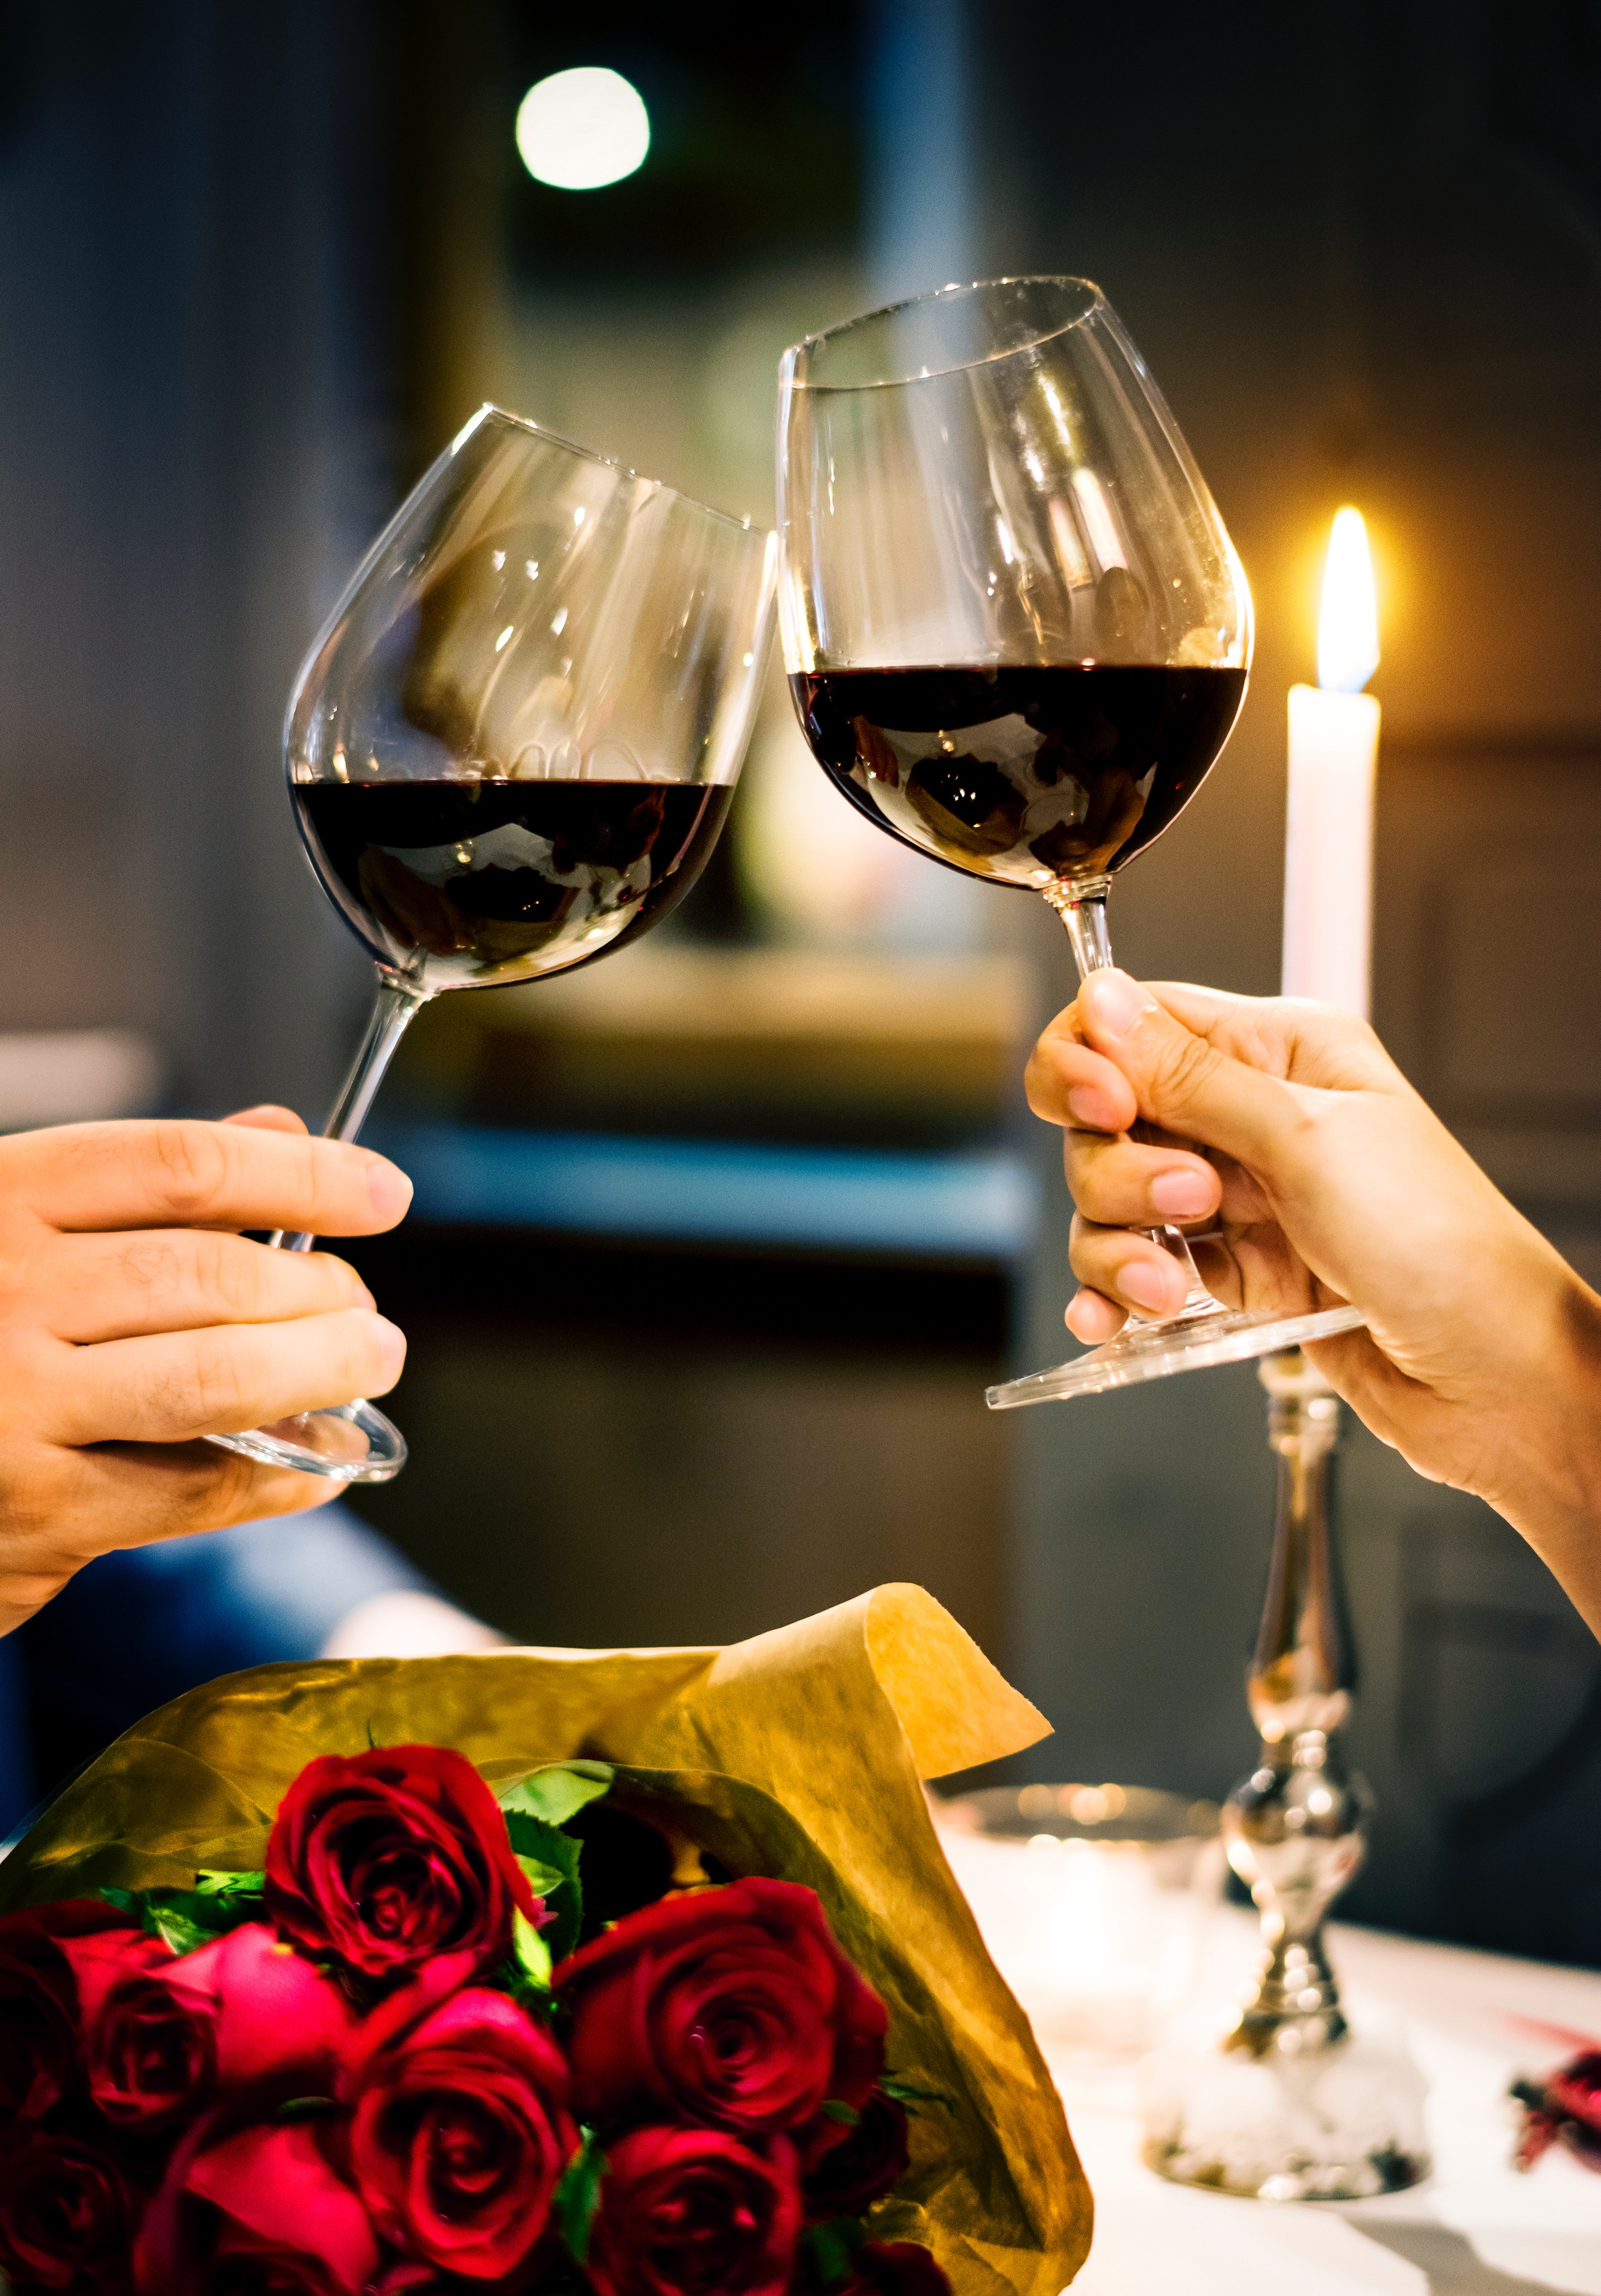 alt="two wine glasses clinking at candlelit dinner"